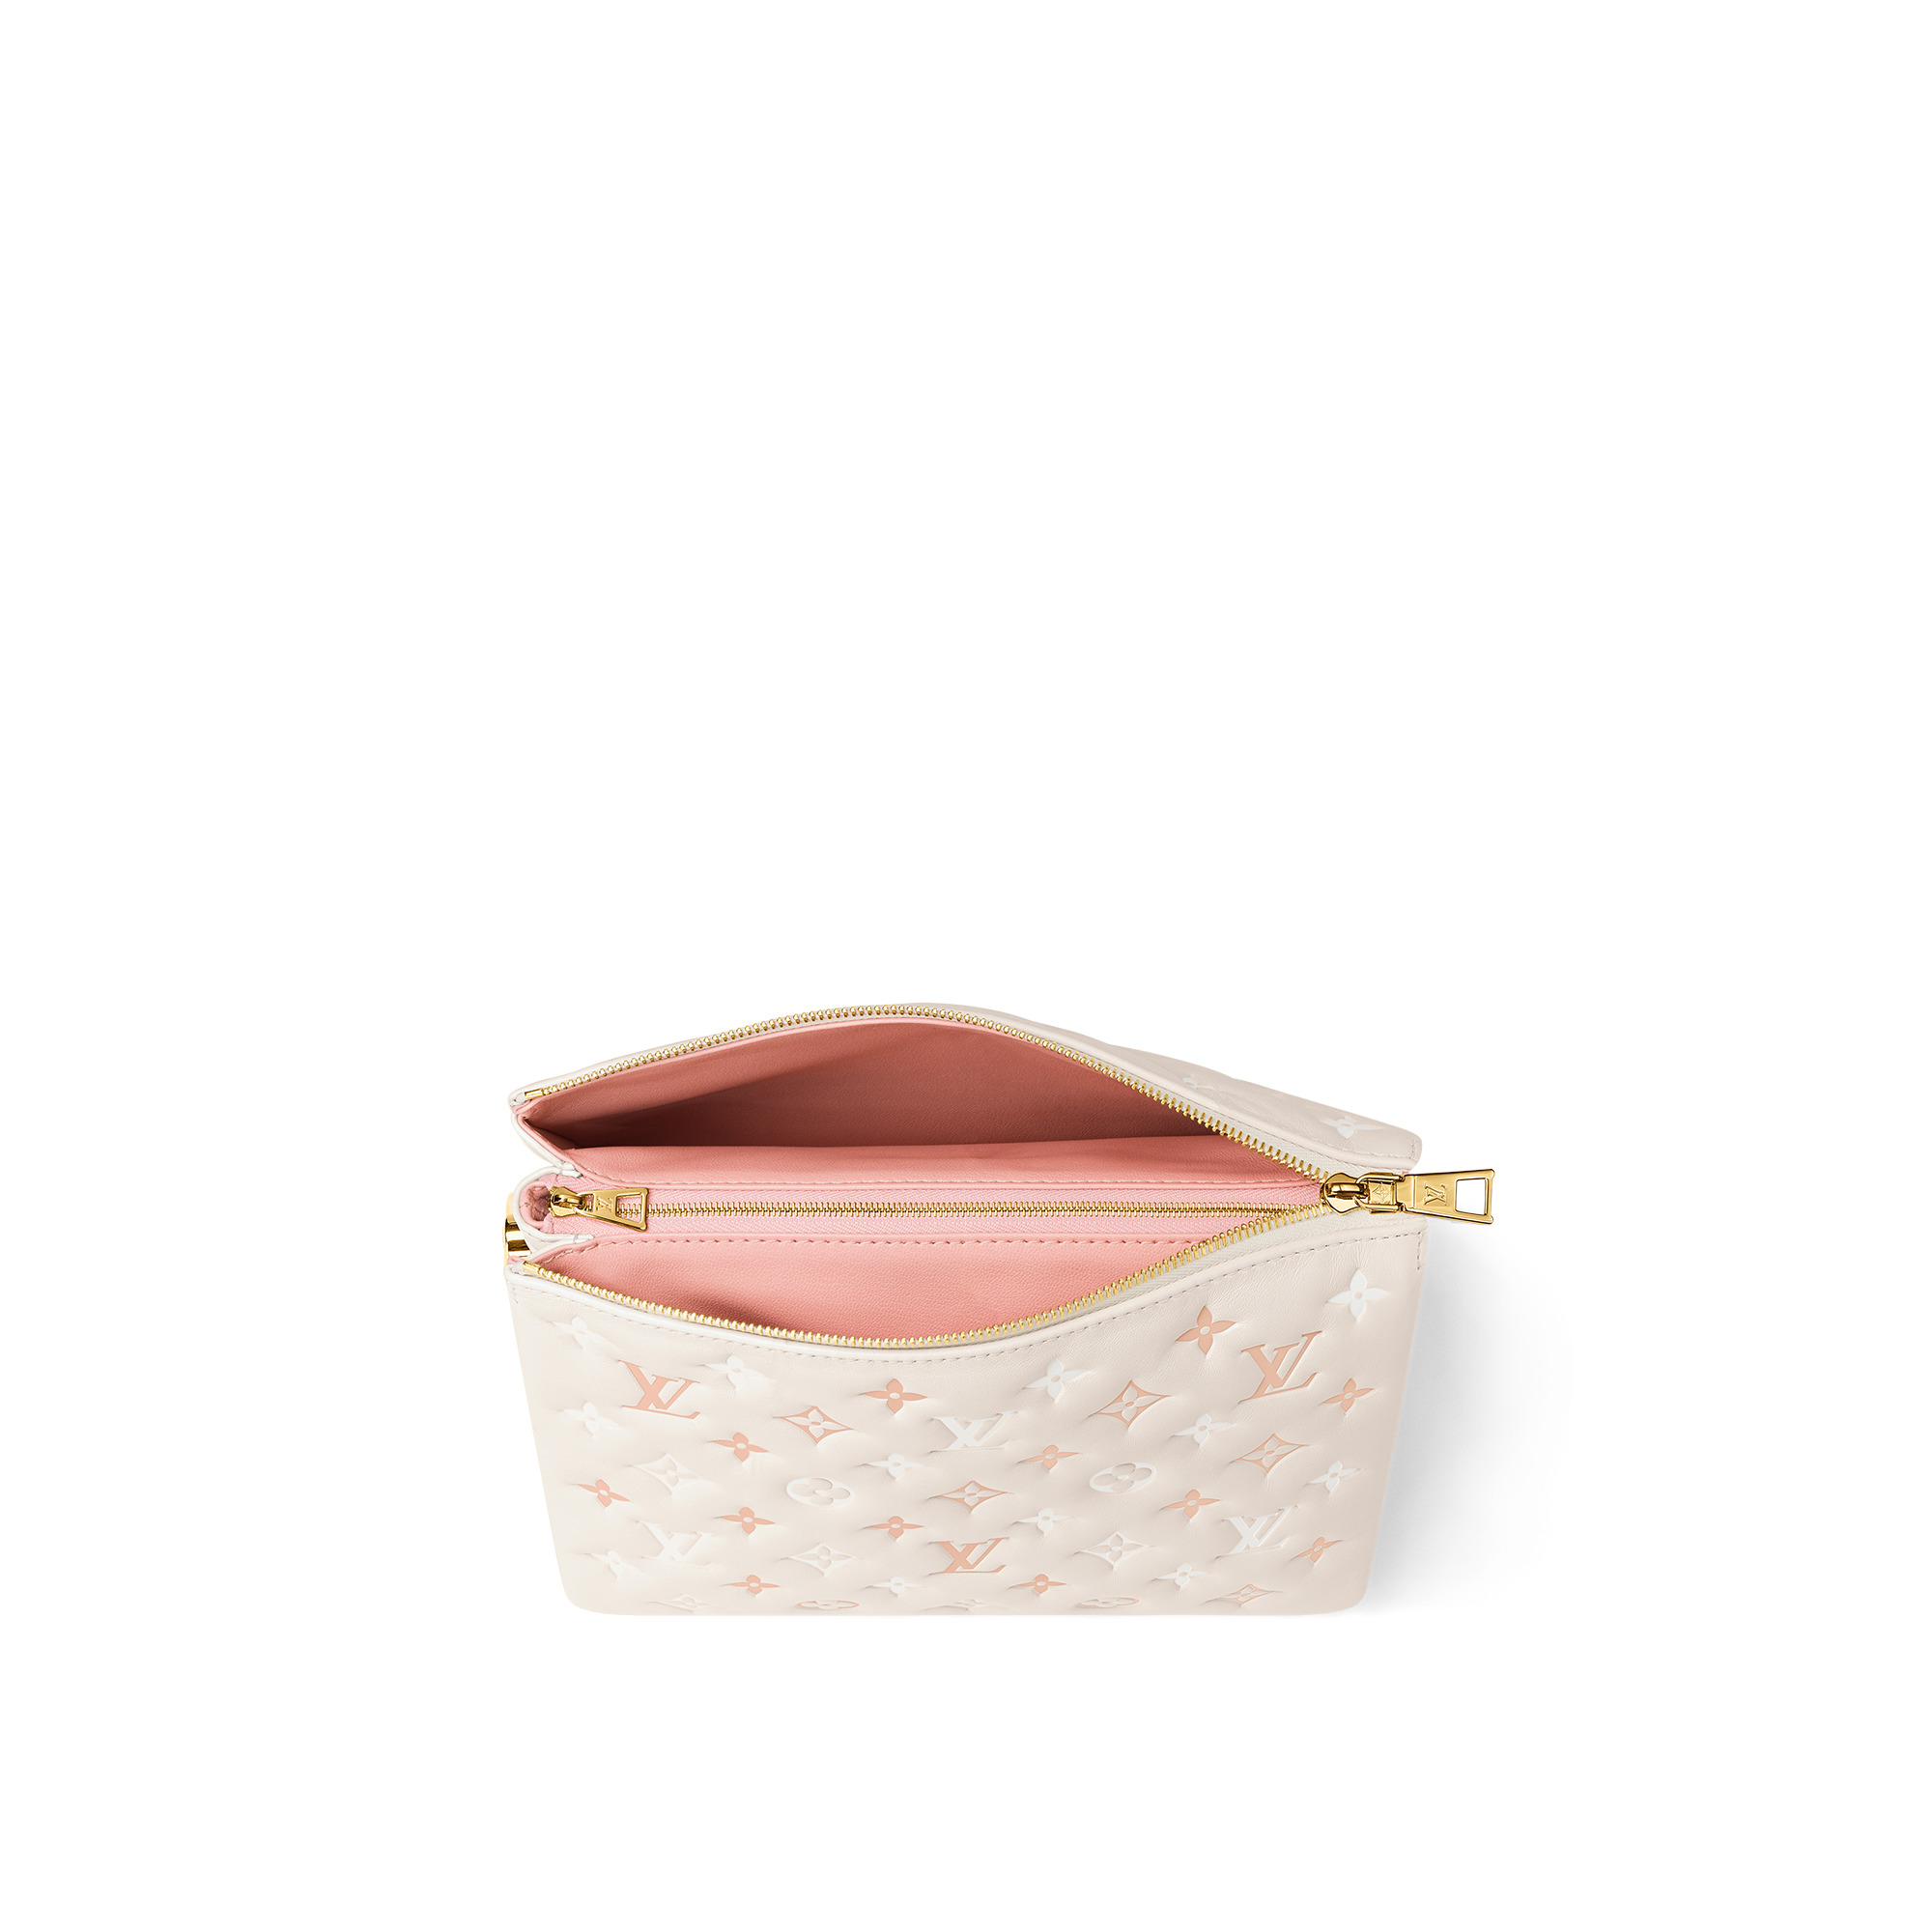 Louis Vuitton Coussin PM, Pink, One Size